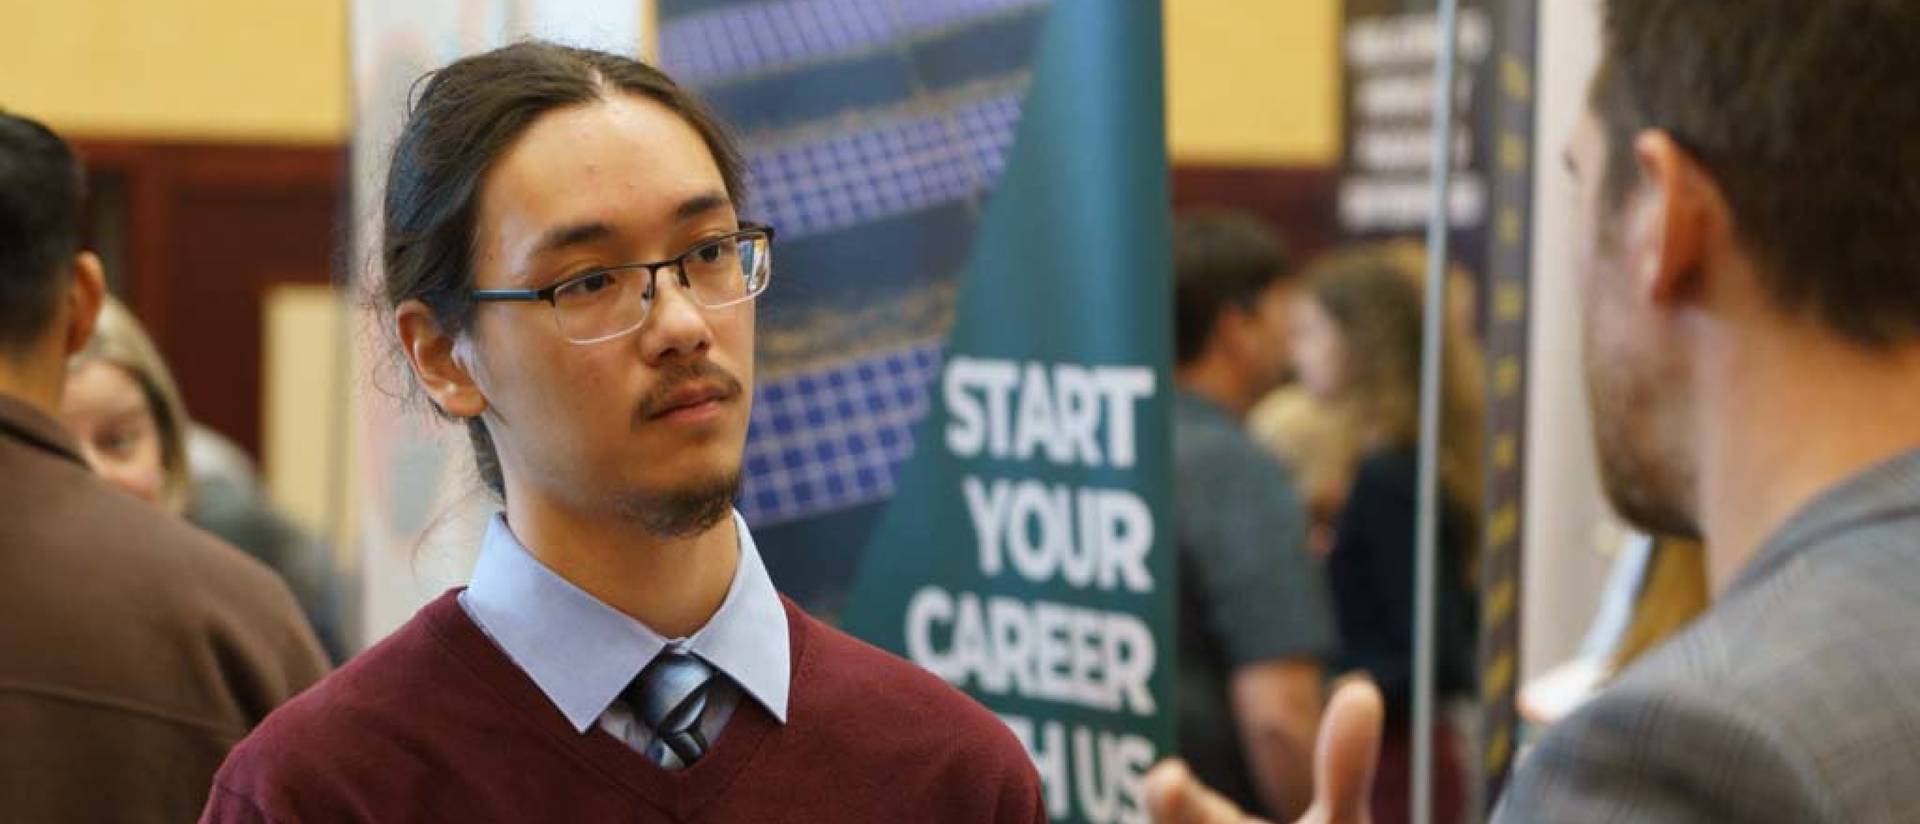 A student interacts with an employer at a Career Fair.